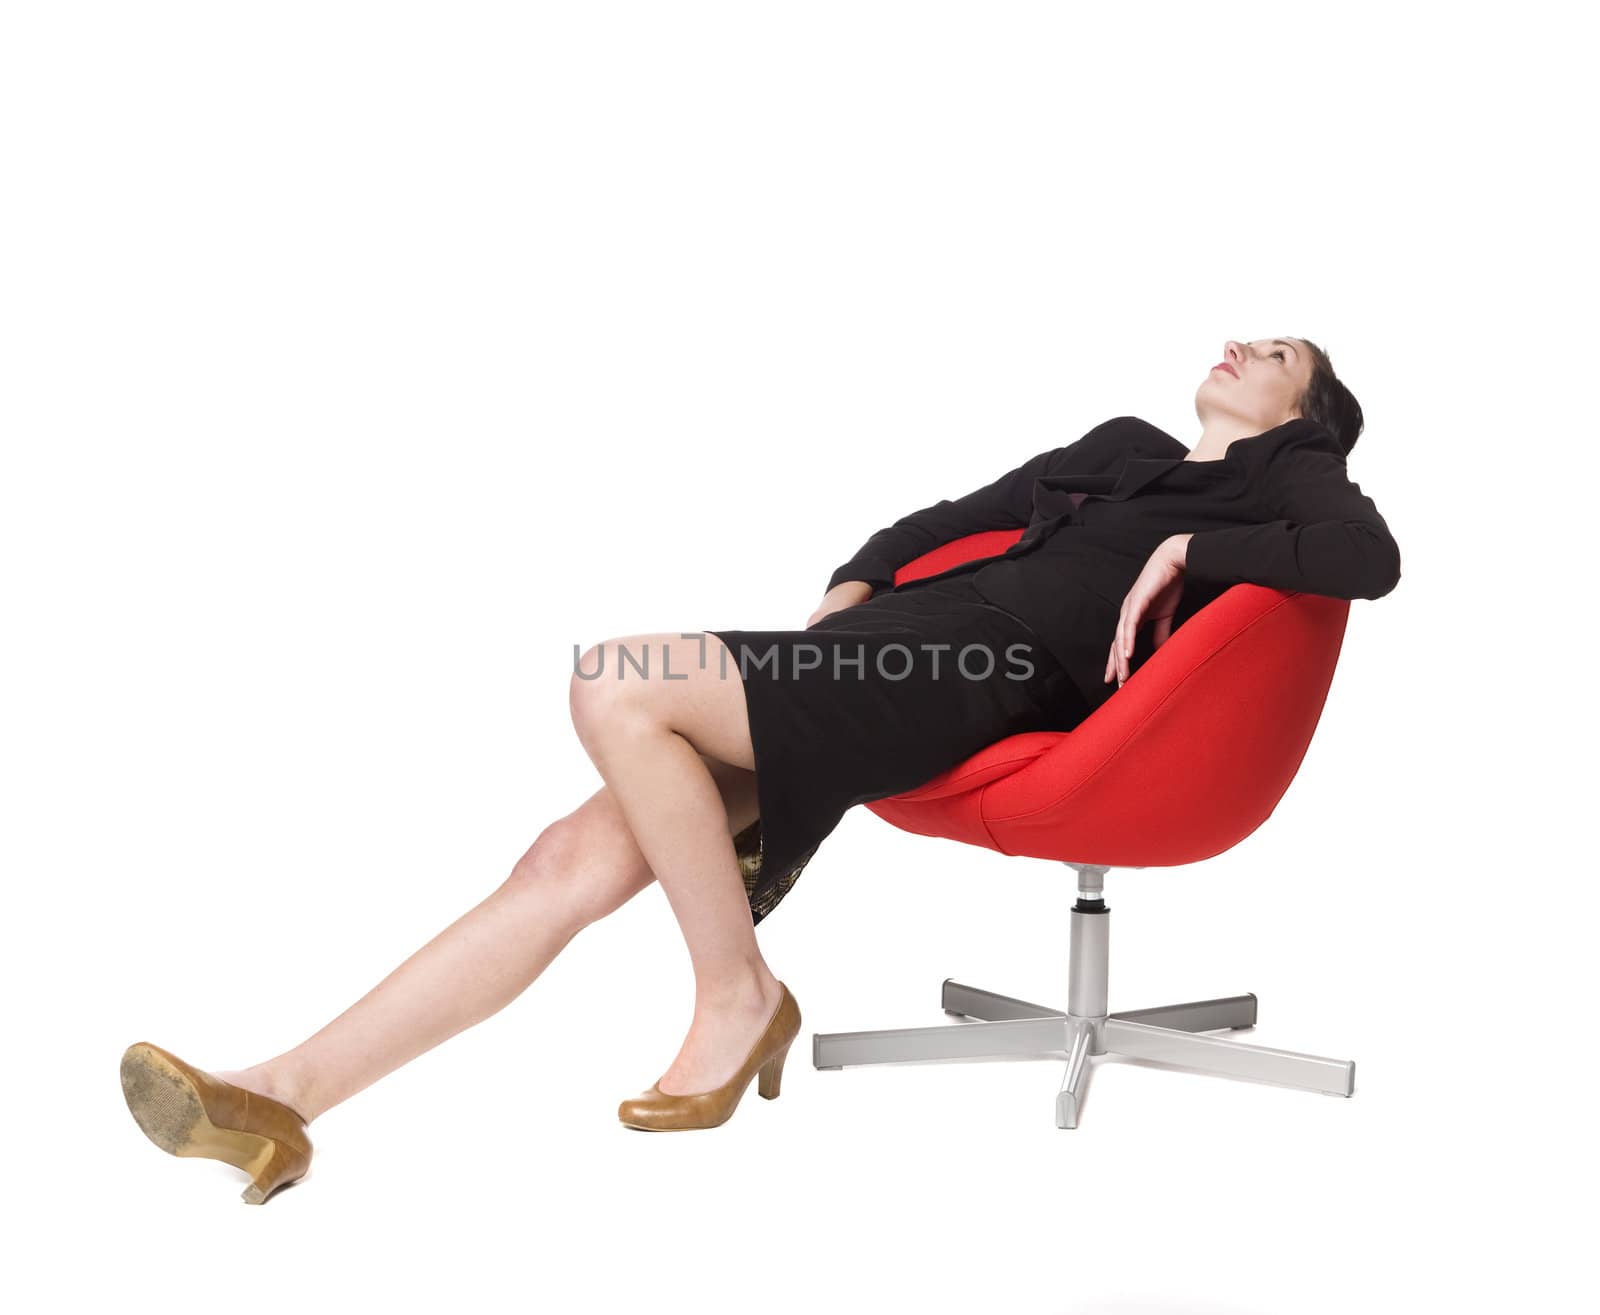 Lazy woman in a chair by gemenacom